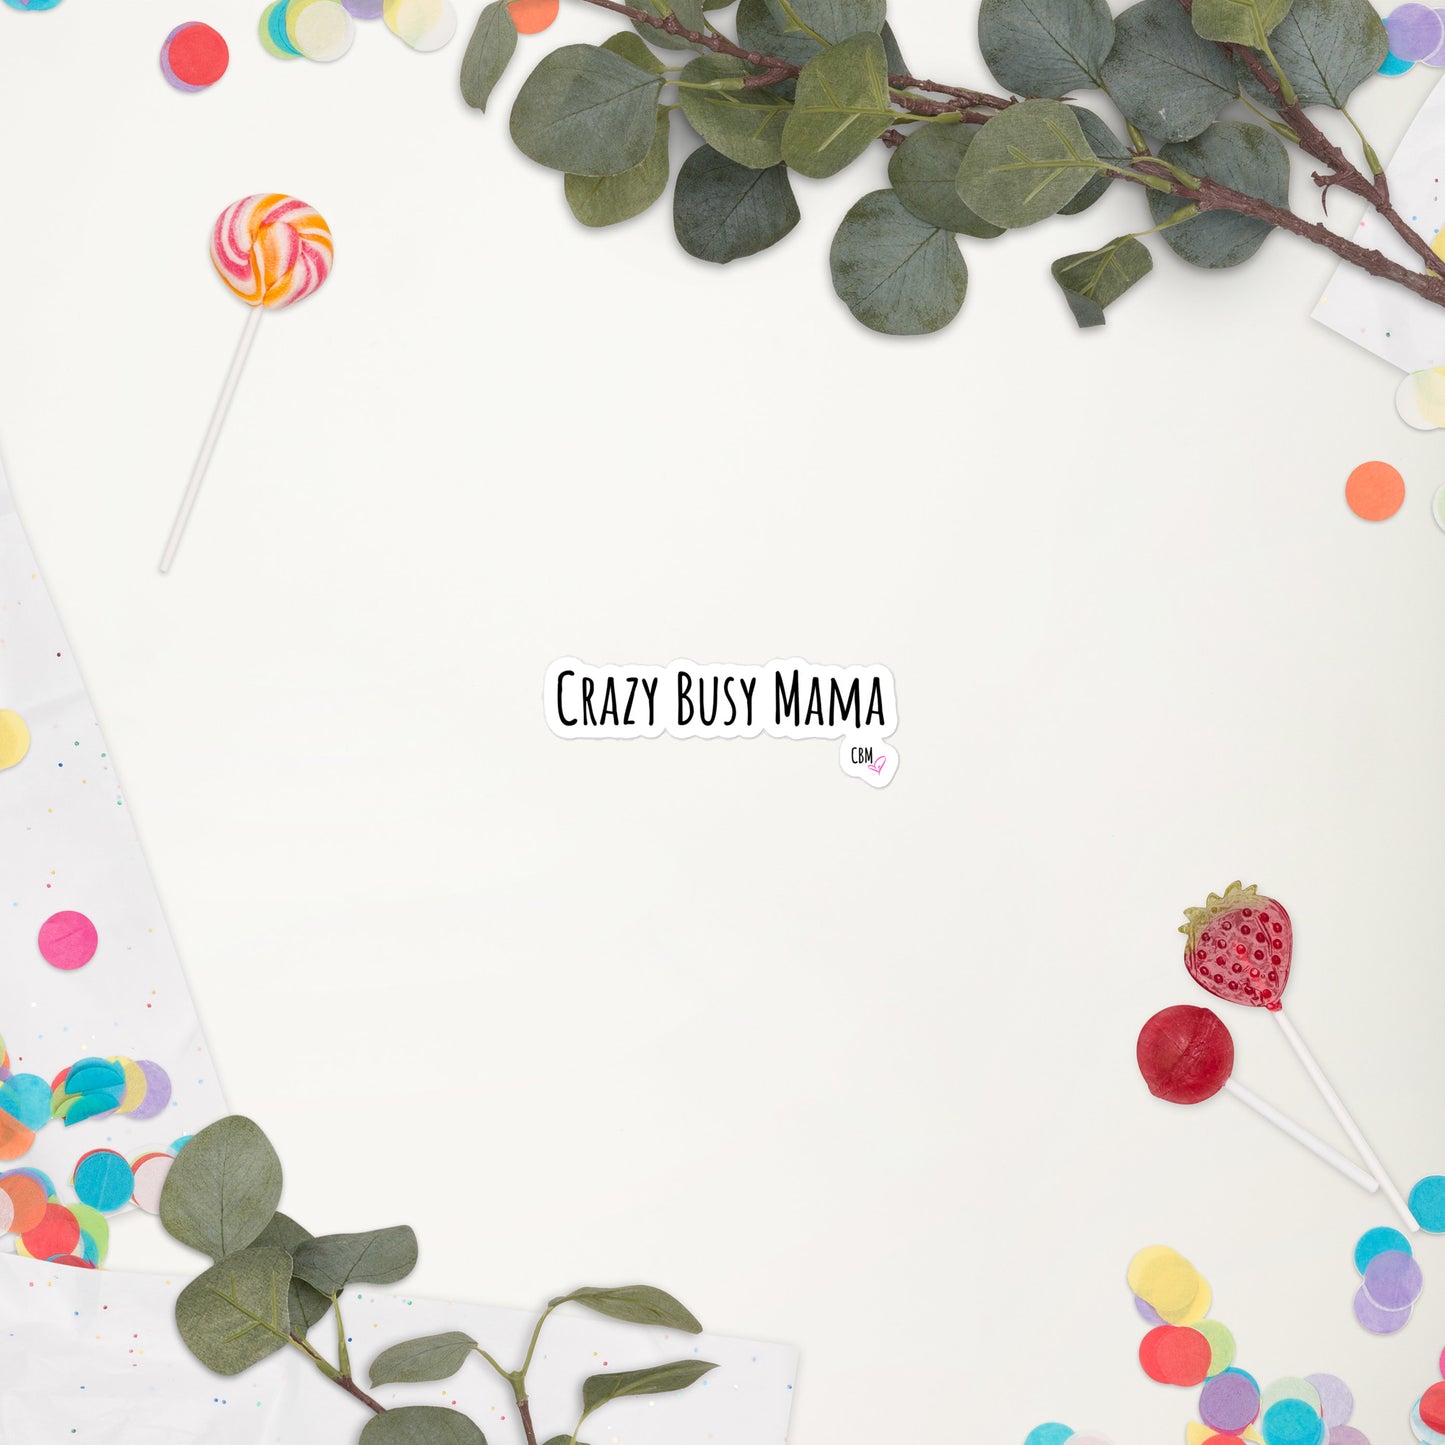 Crazy Busy Mama Bubble-free stickers